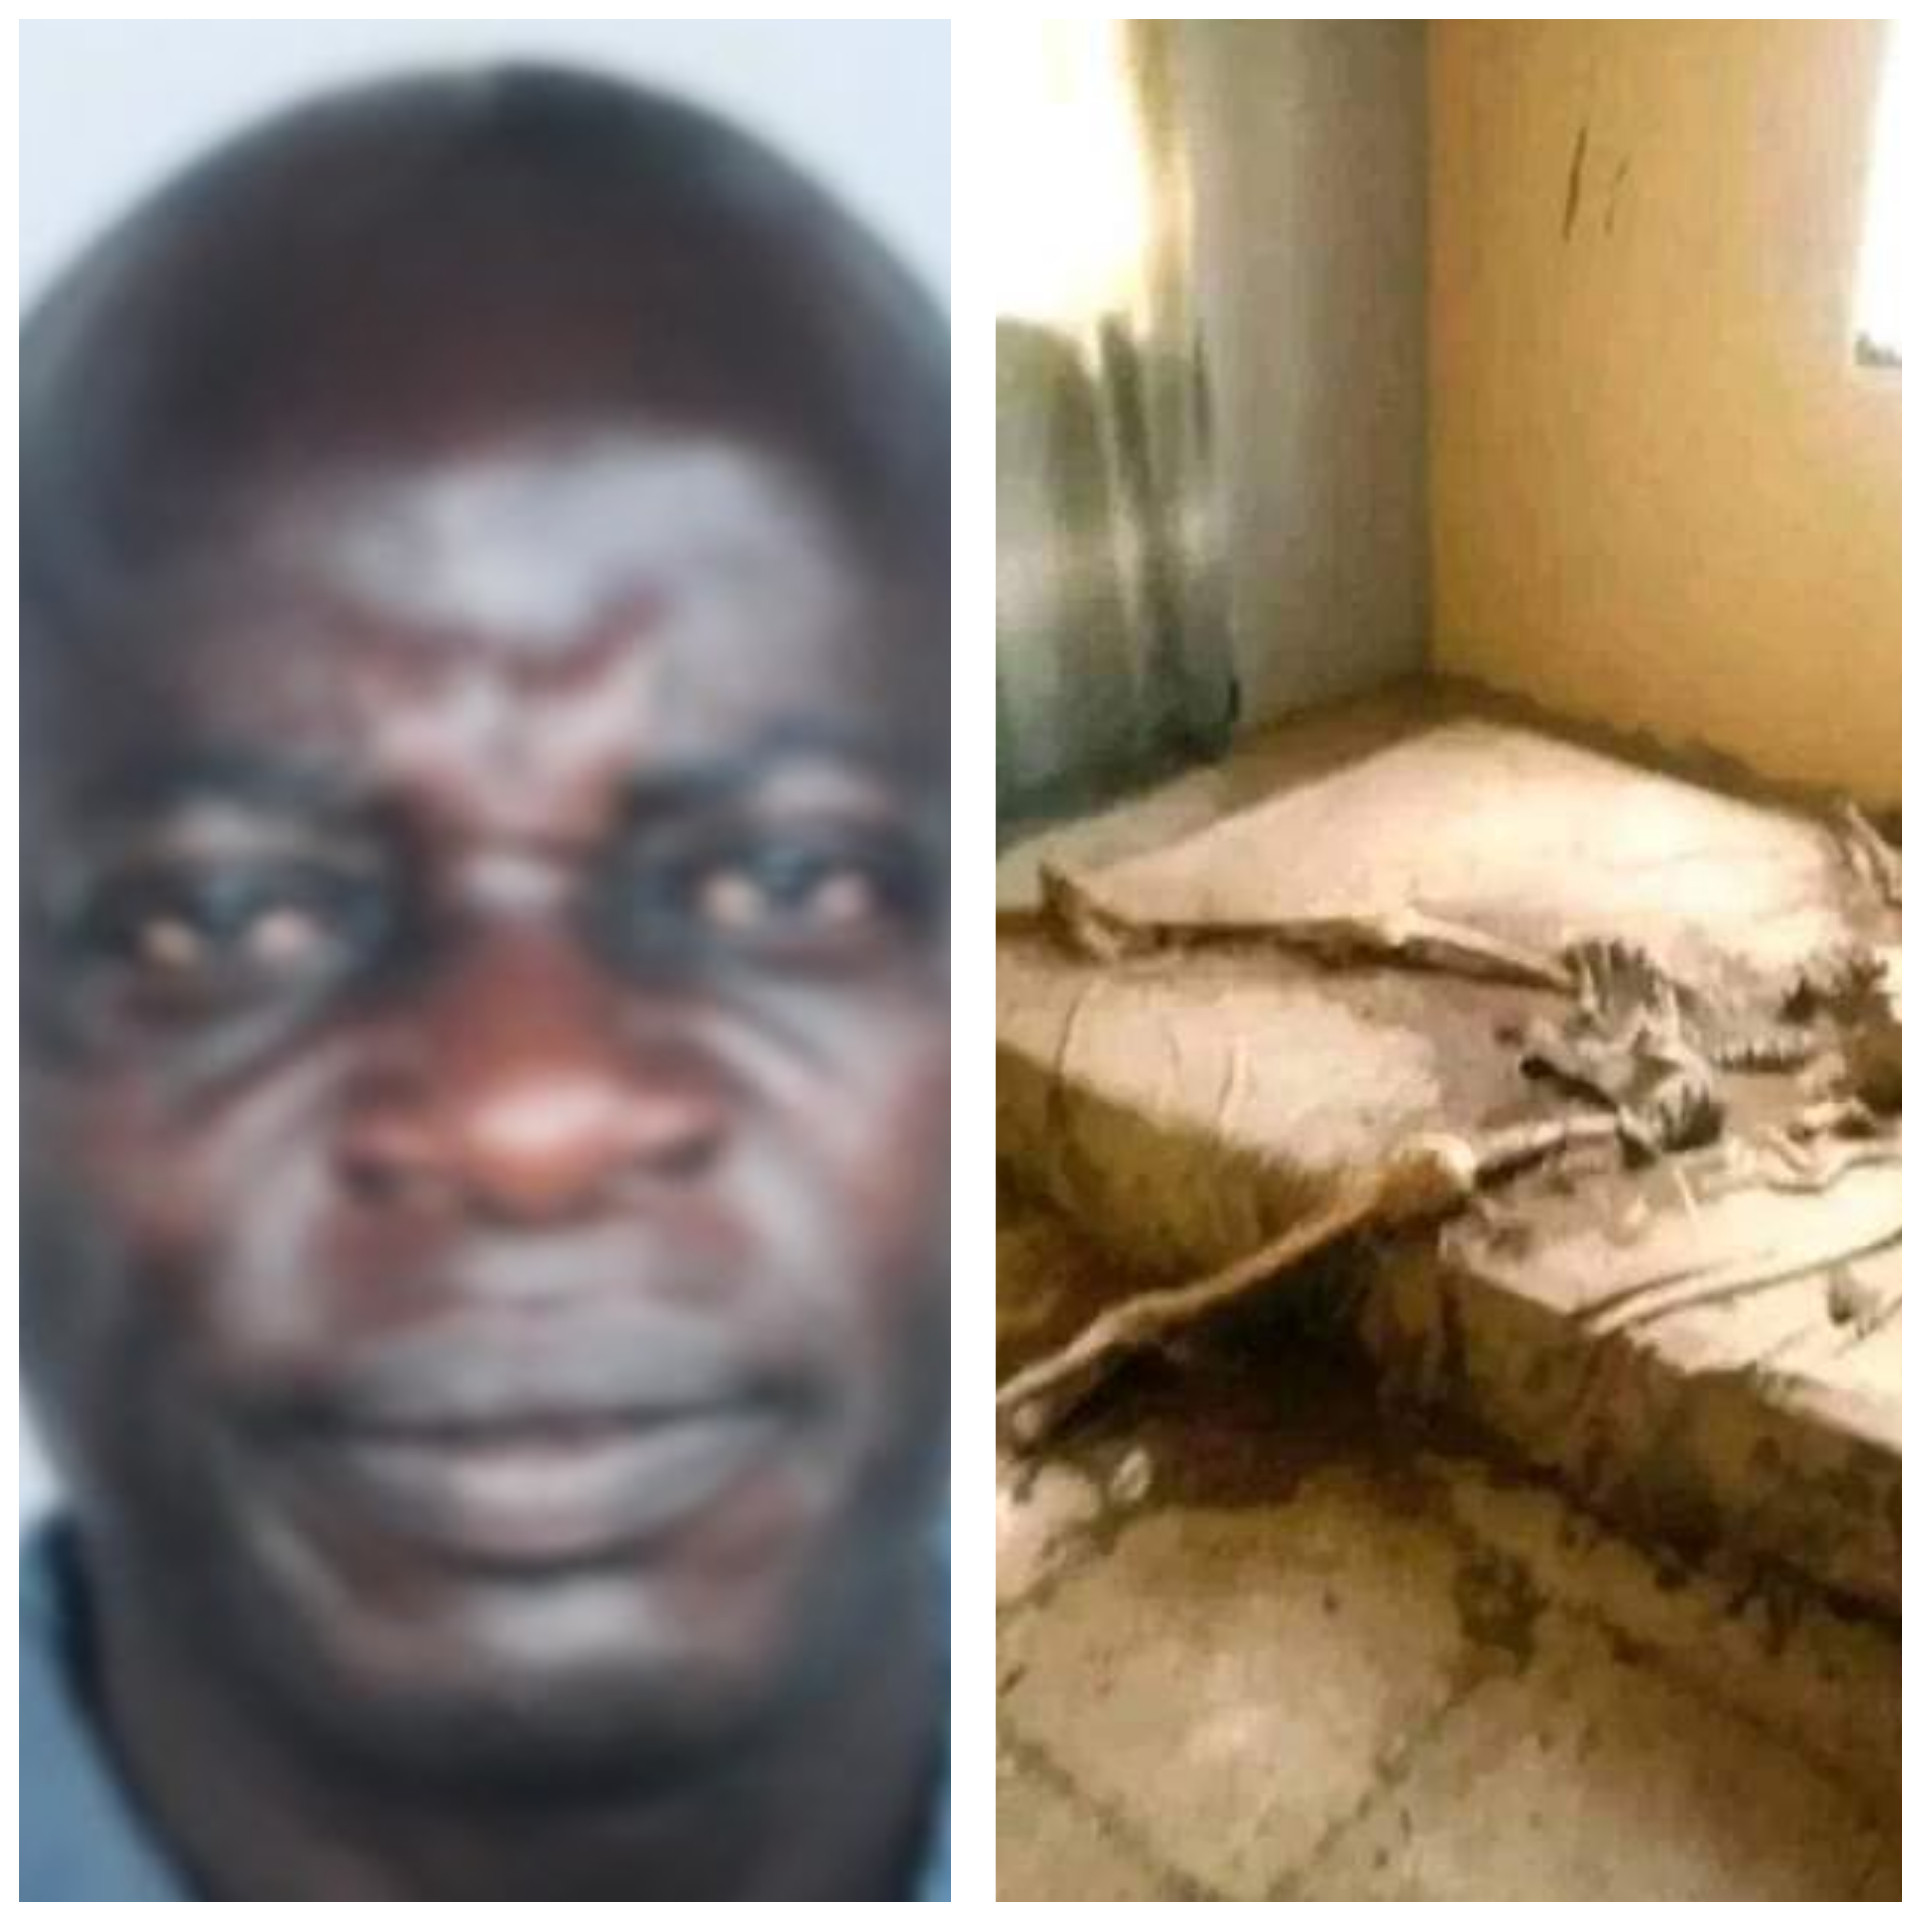 Skeletal remains of landlord found inside his bedroom in Oyo community 4 years after he was last seen